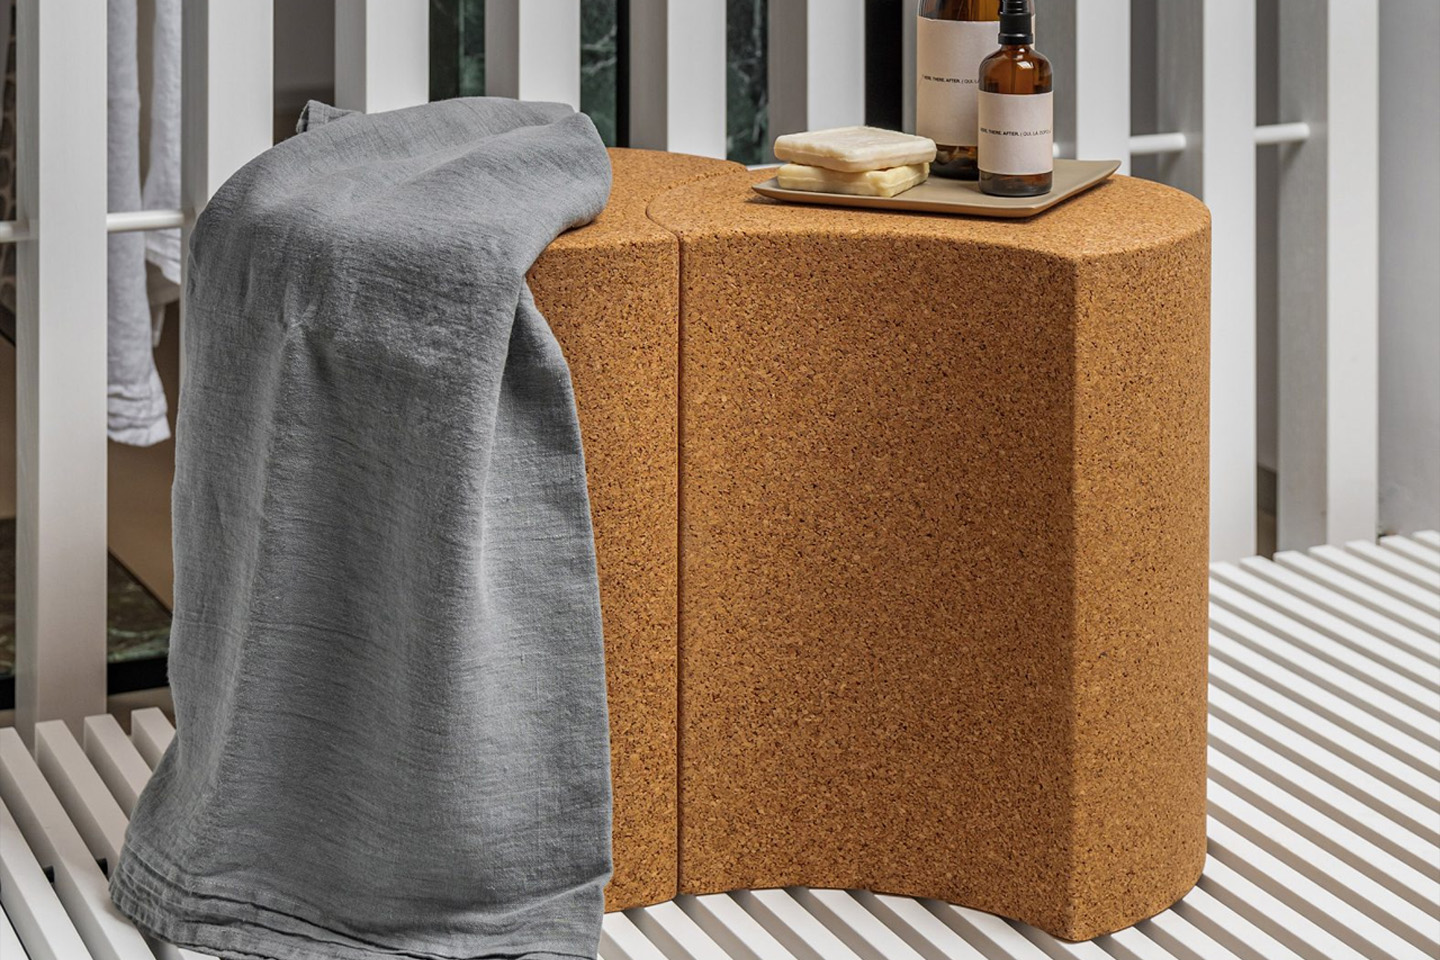 This sustainable + up to date assortment of toilet seating was made utilizing recycled cork